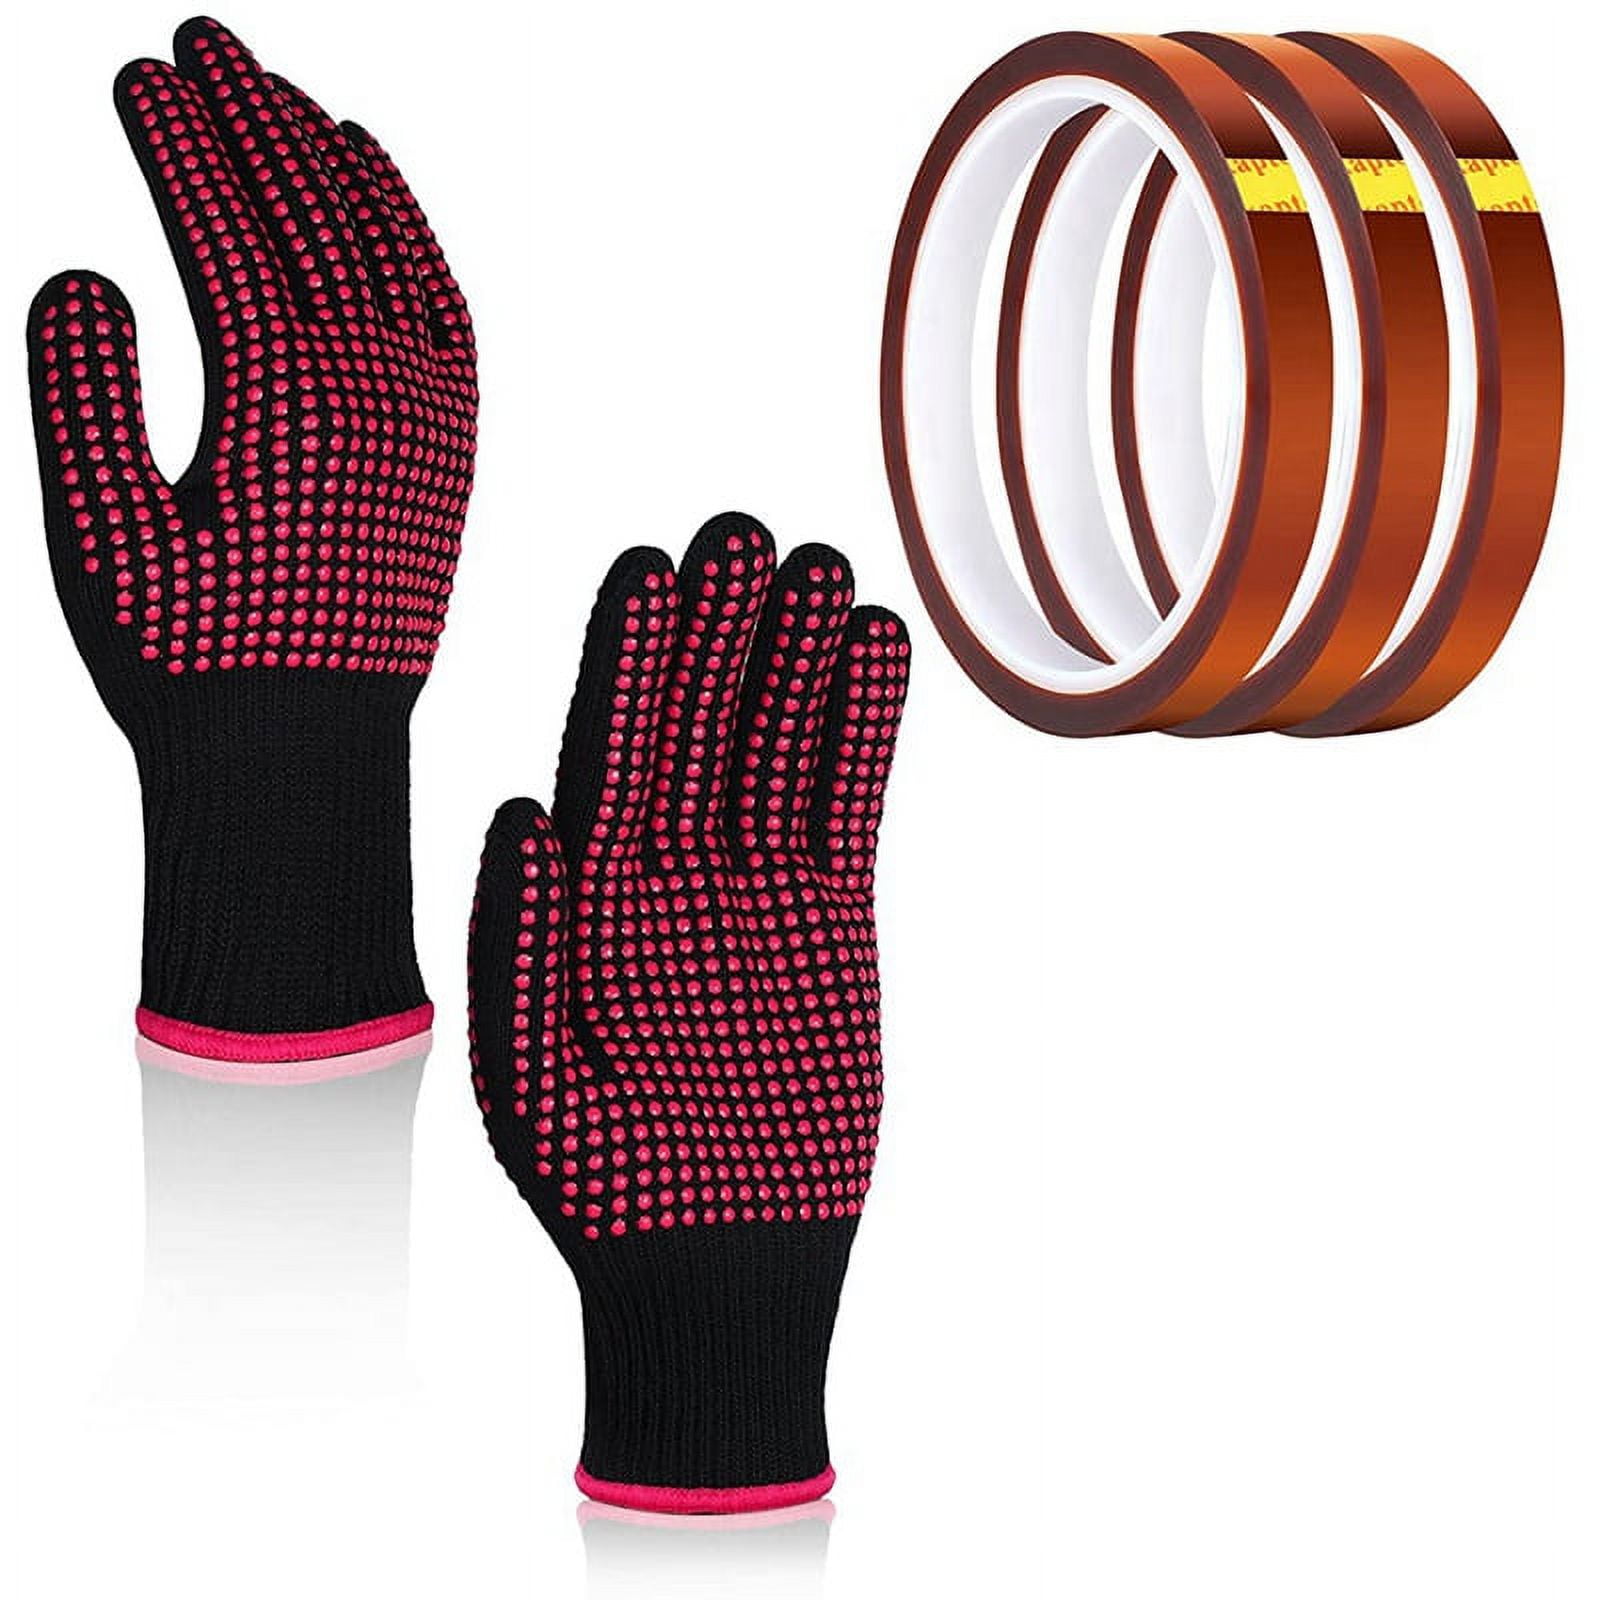 6 Pairs Heat Gloves for Sublimation Heat Resistant Work Gloves for